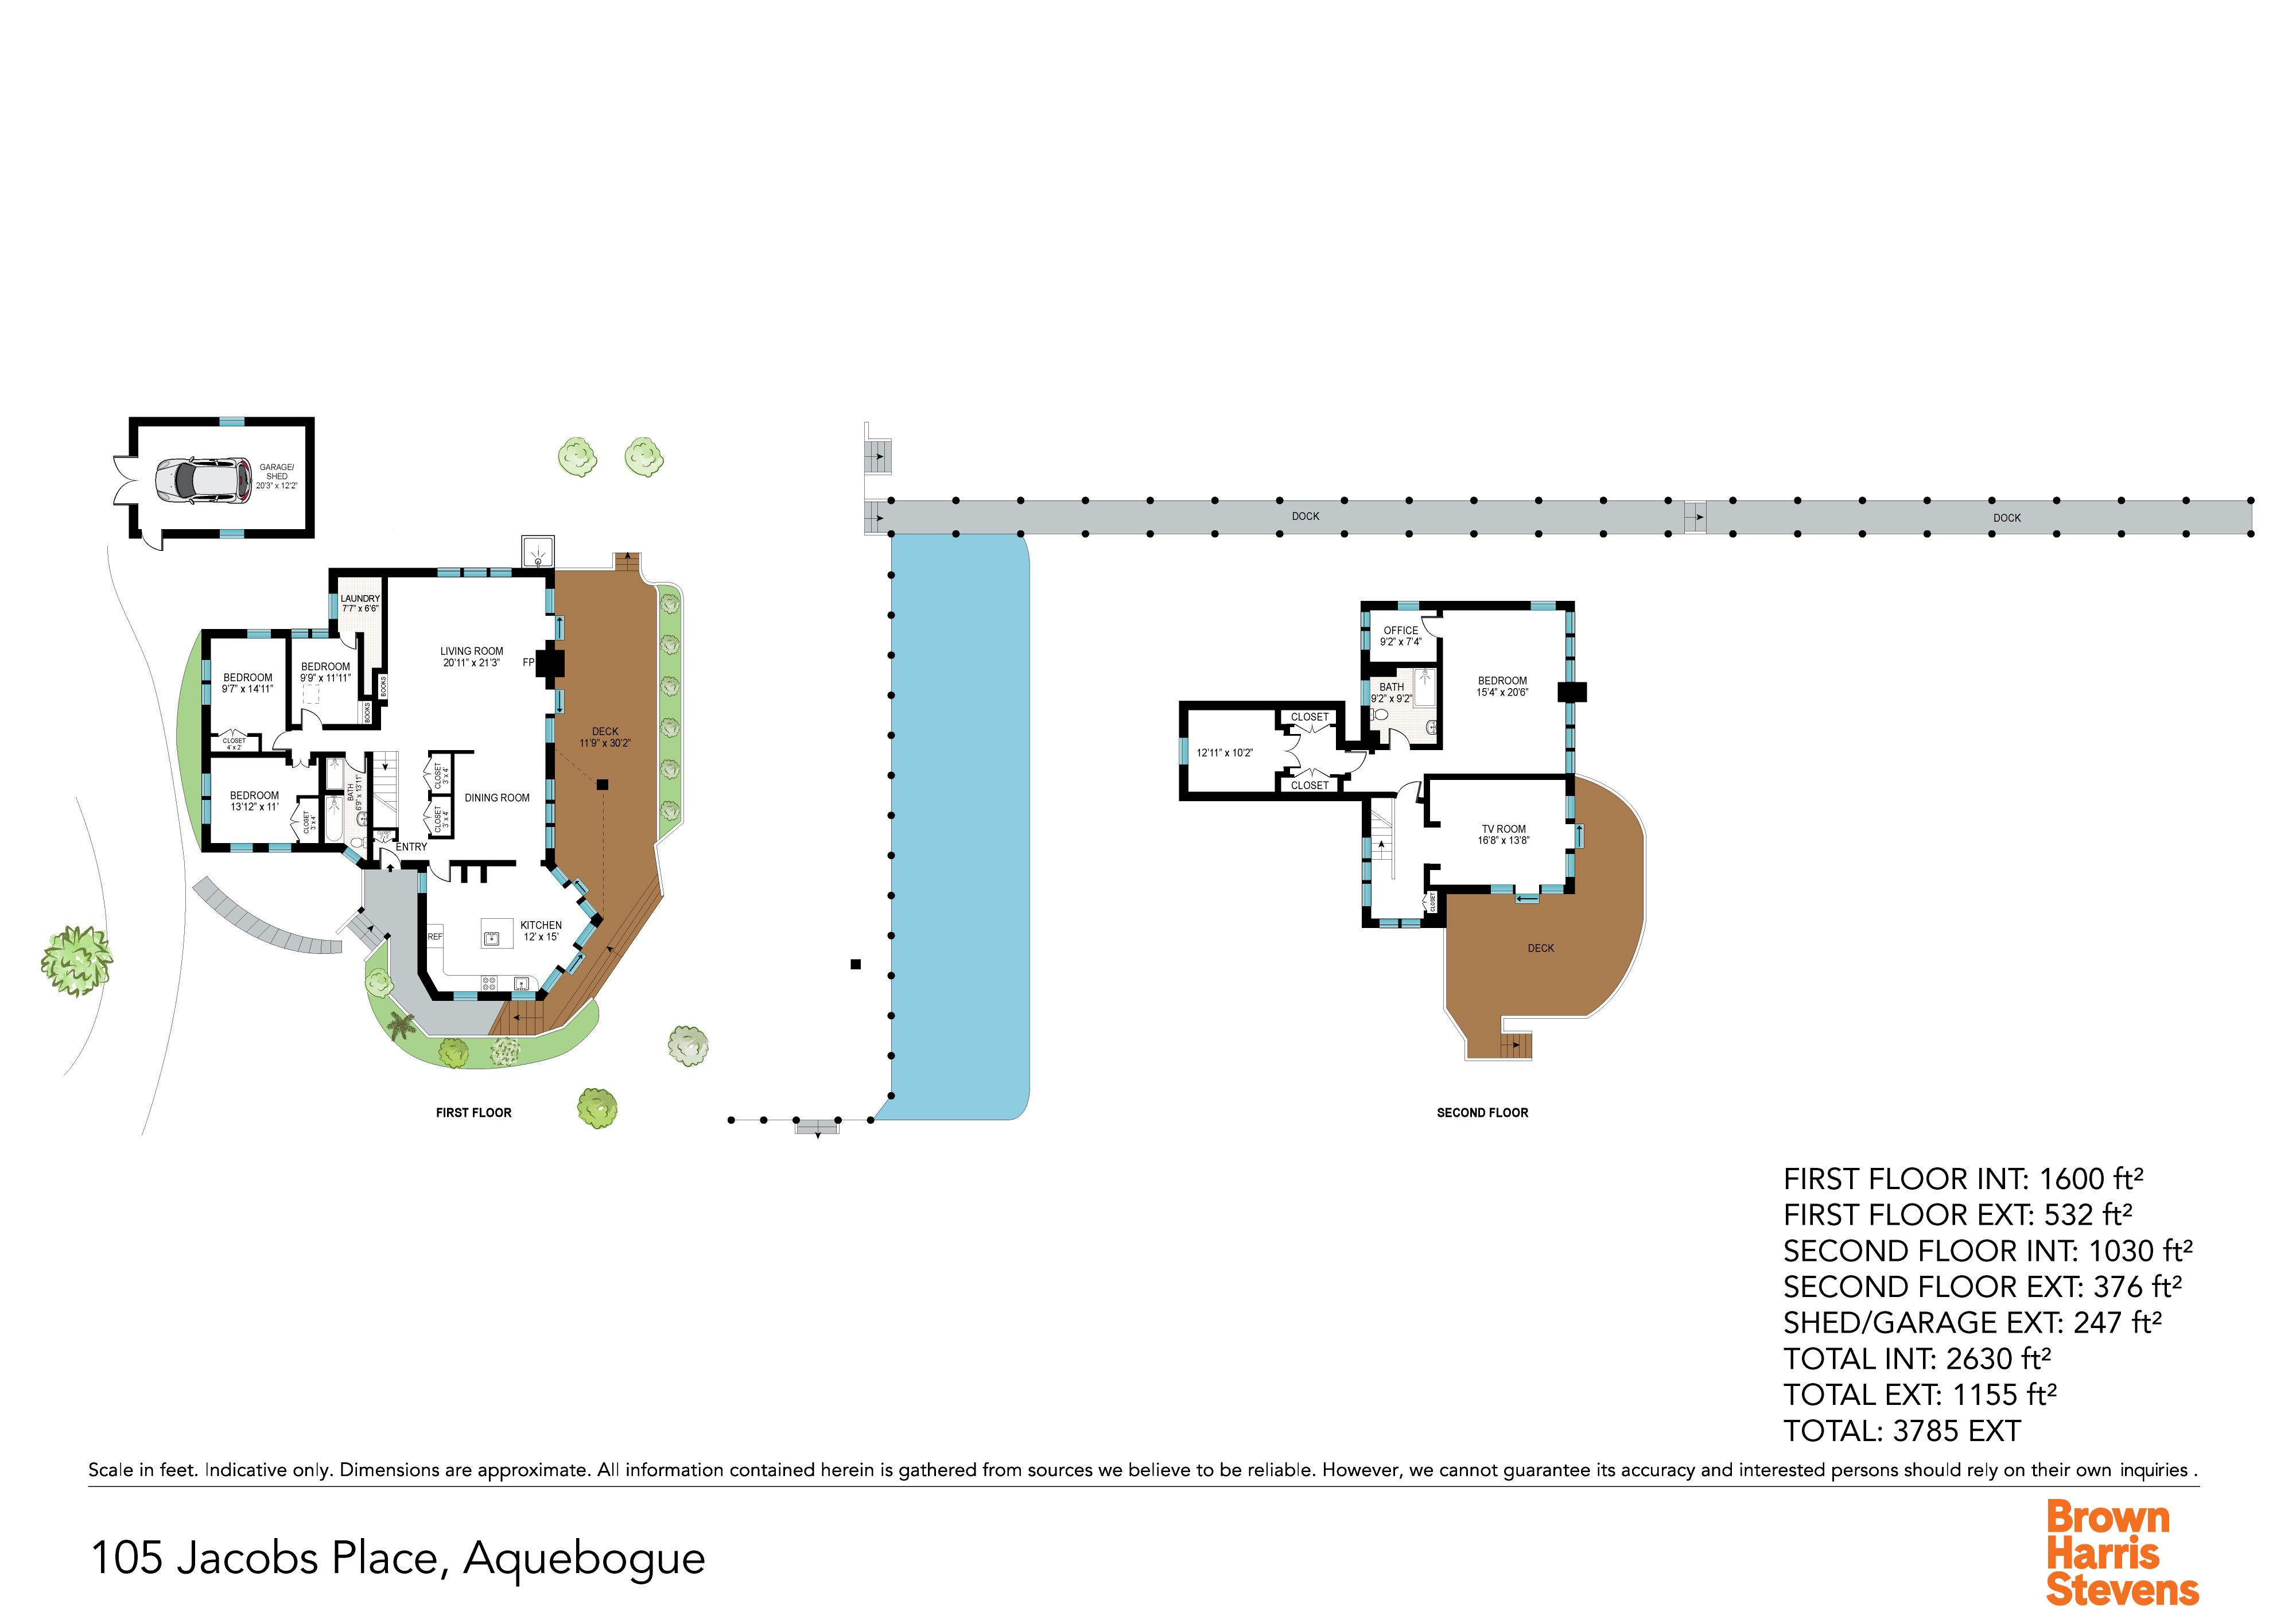 Floorplan for 105 Jacobs Place